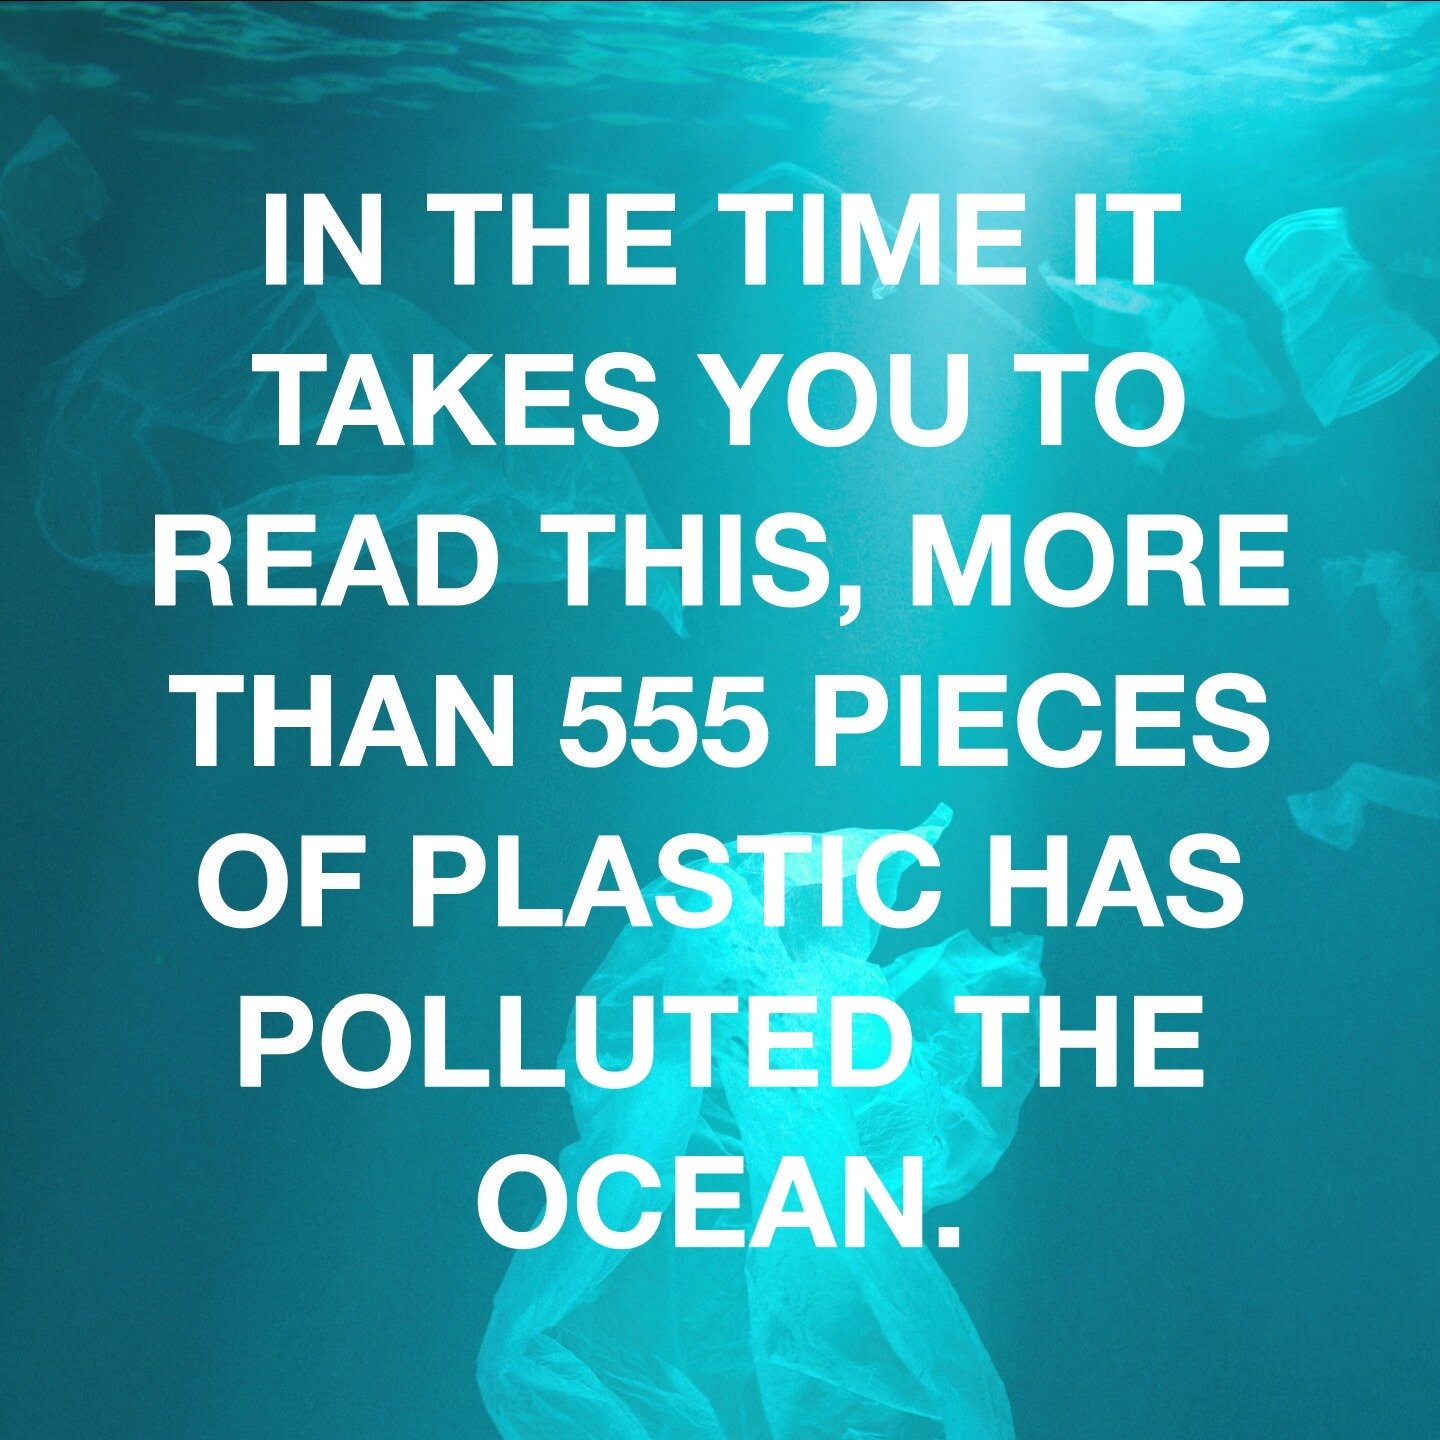 This keeps us up at night. There has to be a way forward #forcleanoceans.